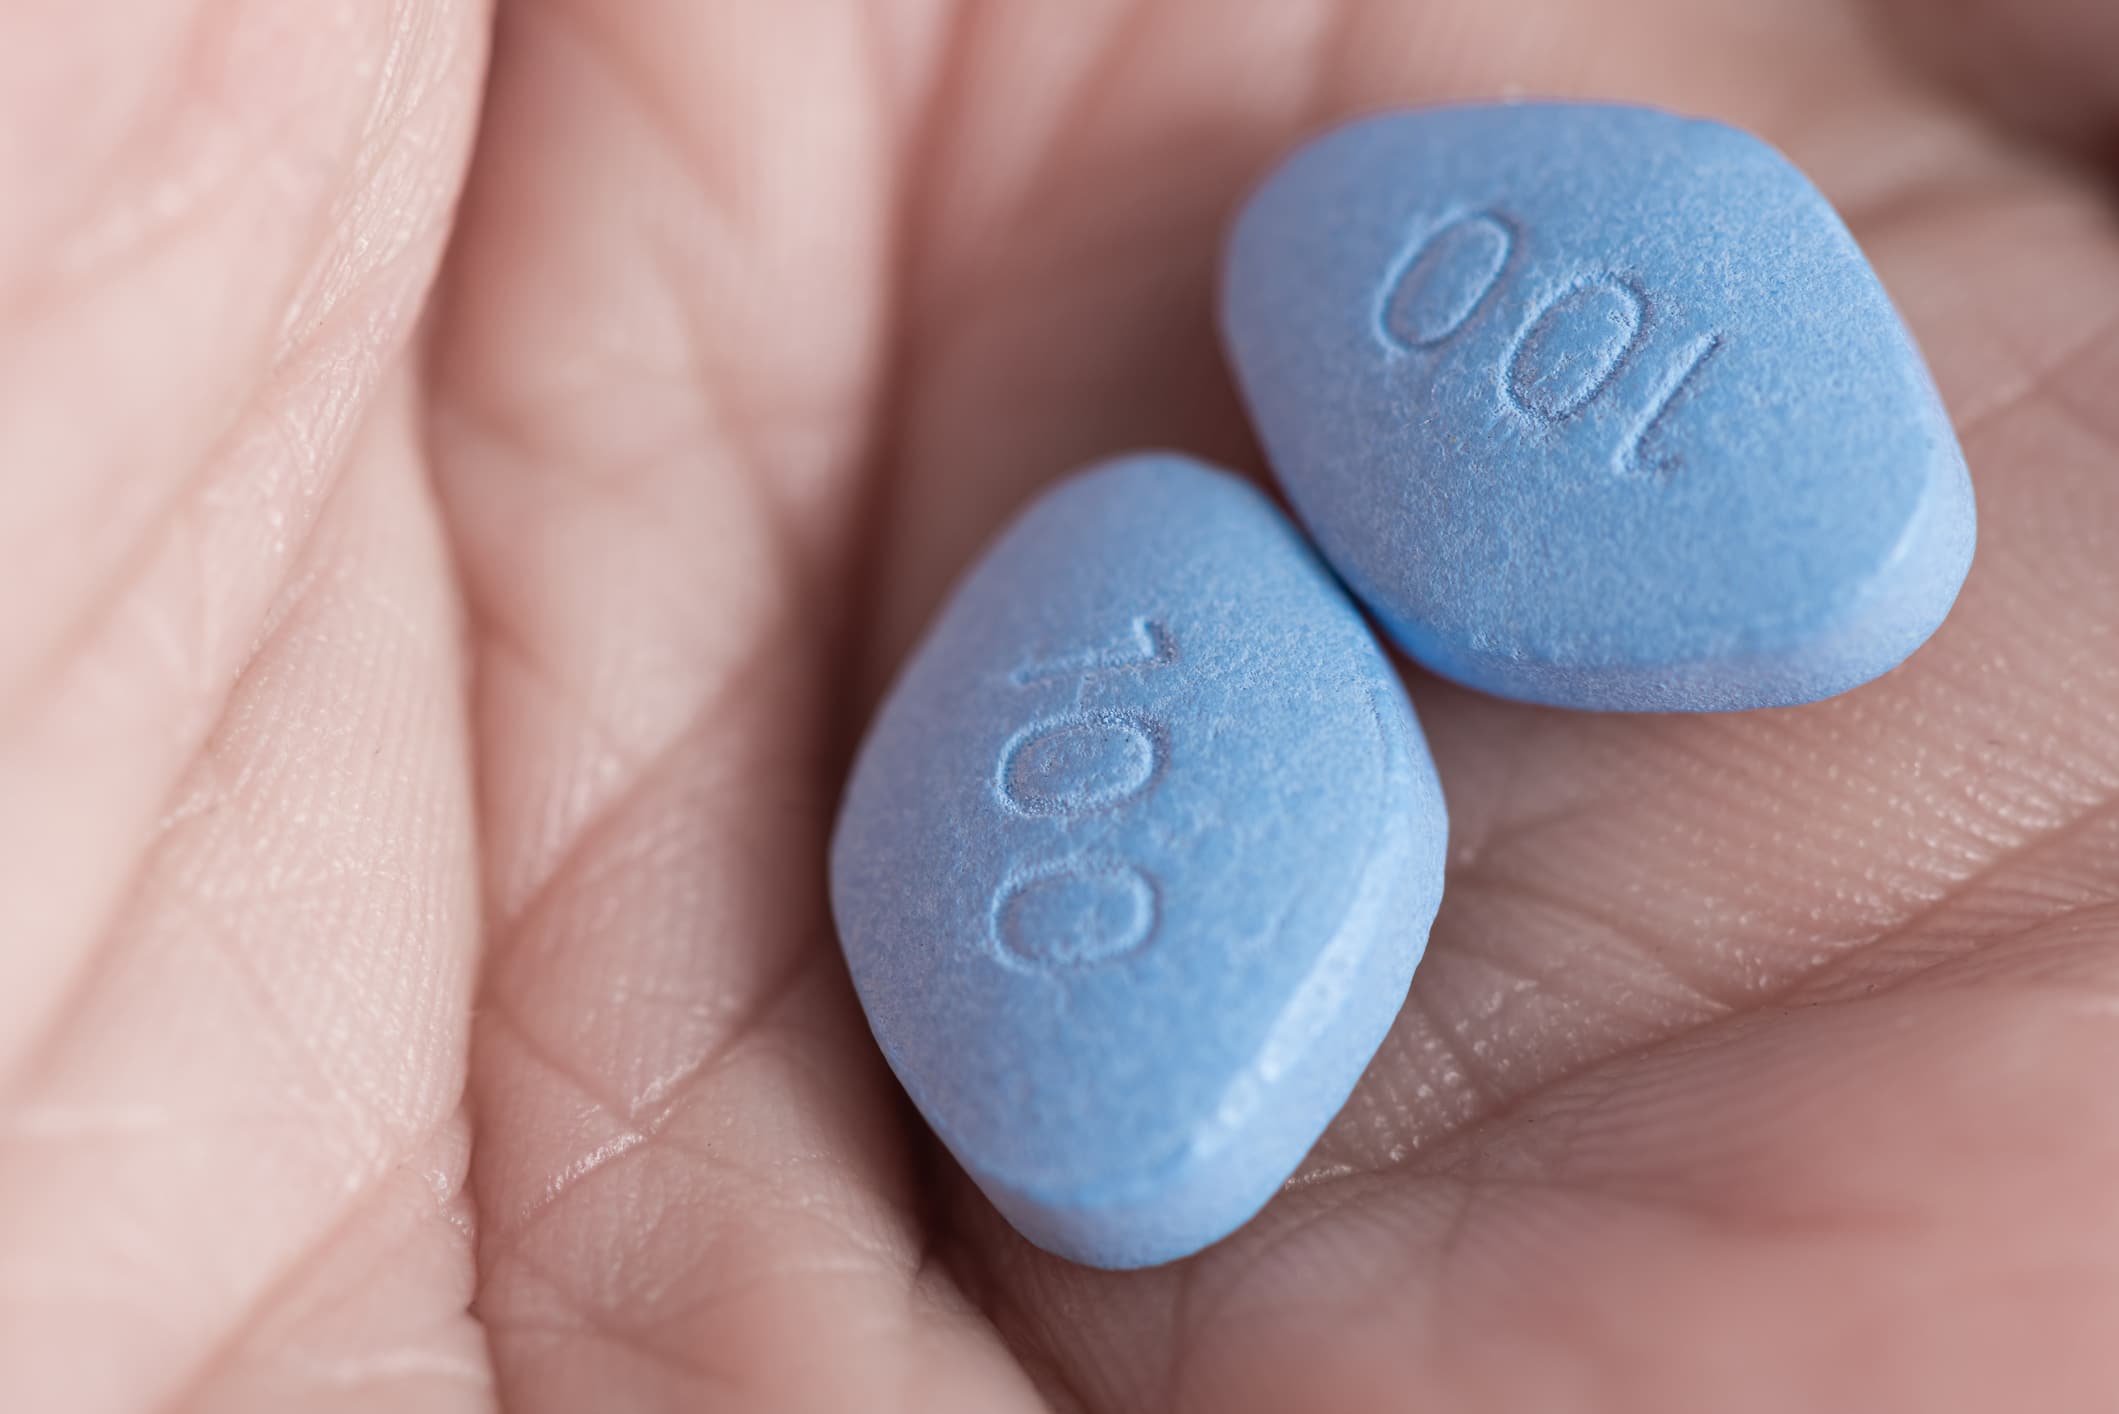 Two blue pills viagra in male hand. Medicine concept of men health, medication for erection, treatment of erectile dysfunction